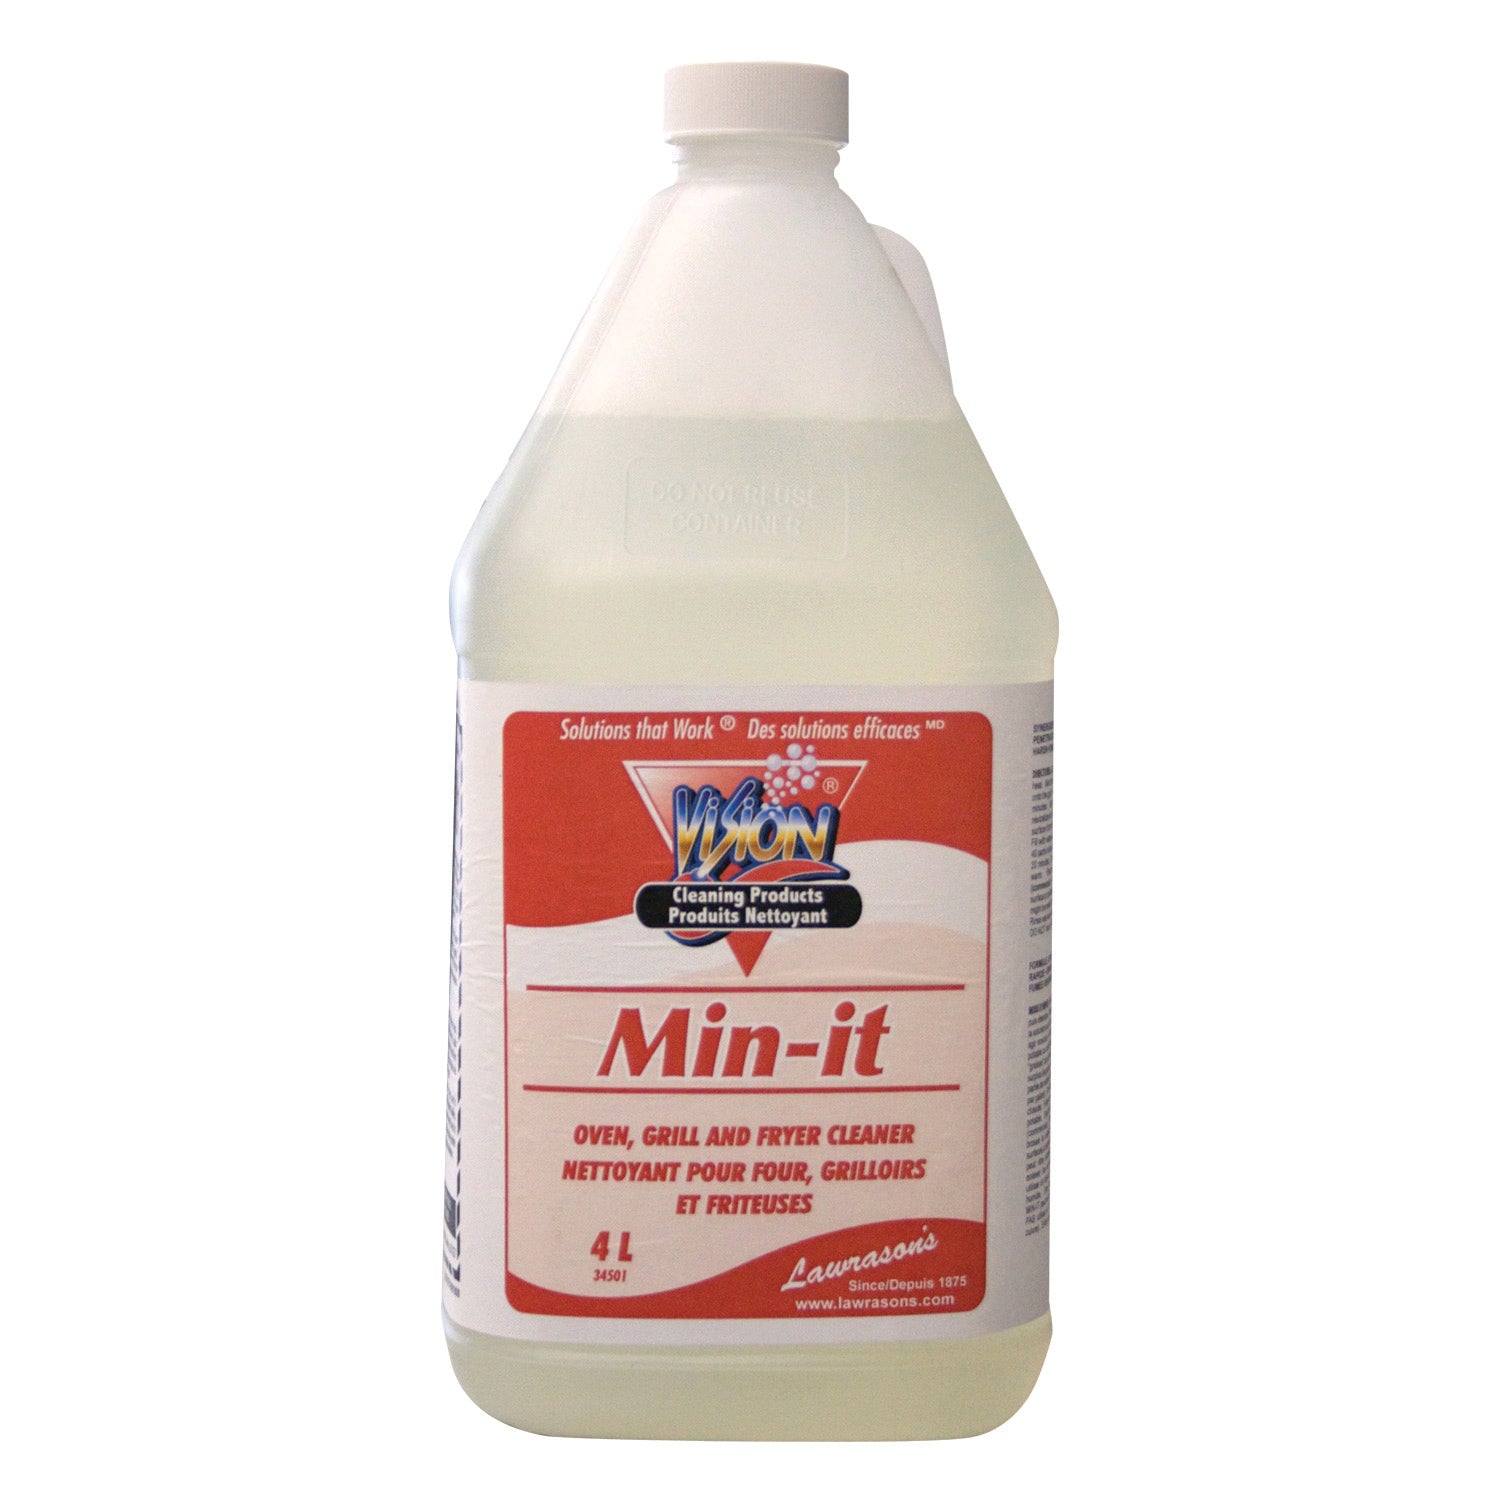 Vision Min-it Oven Cleaner